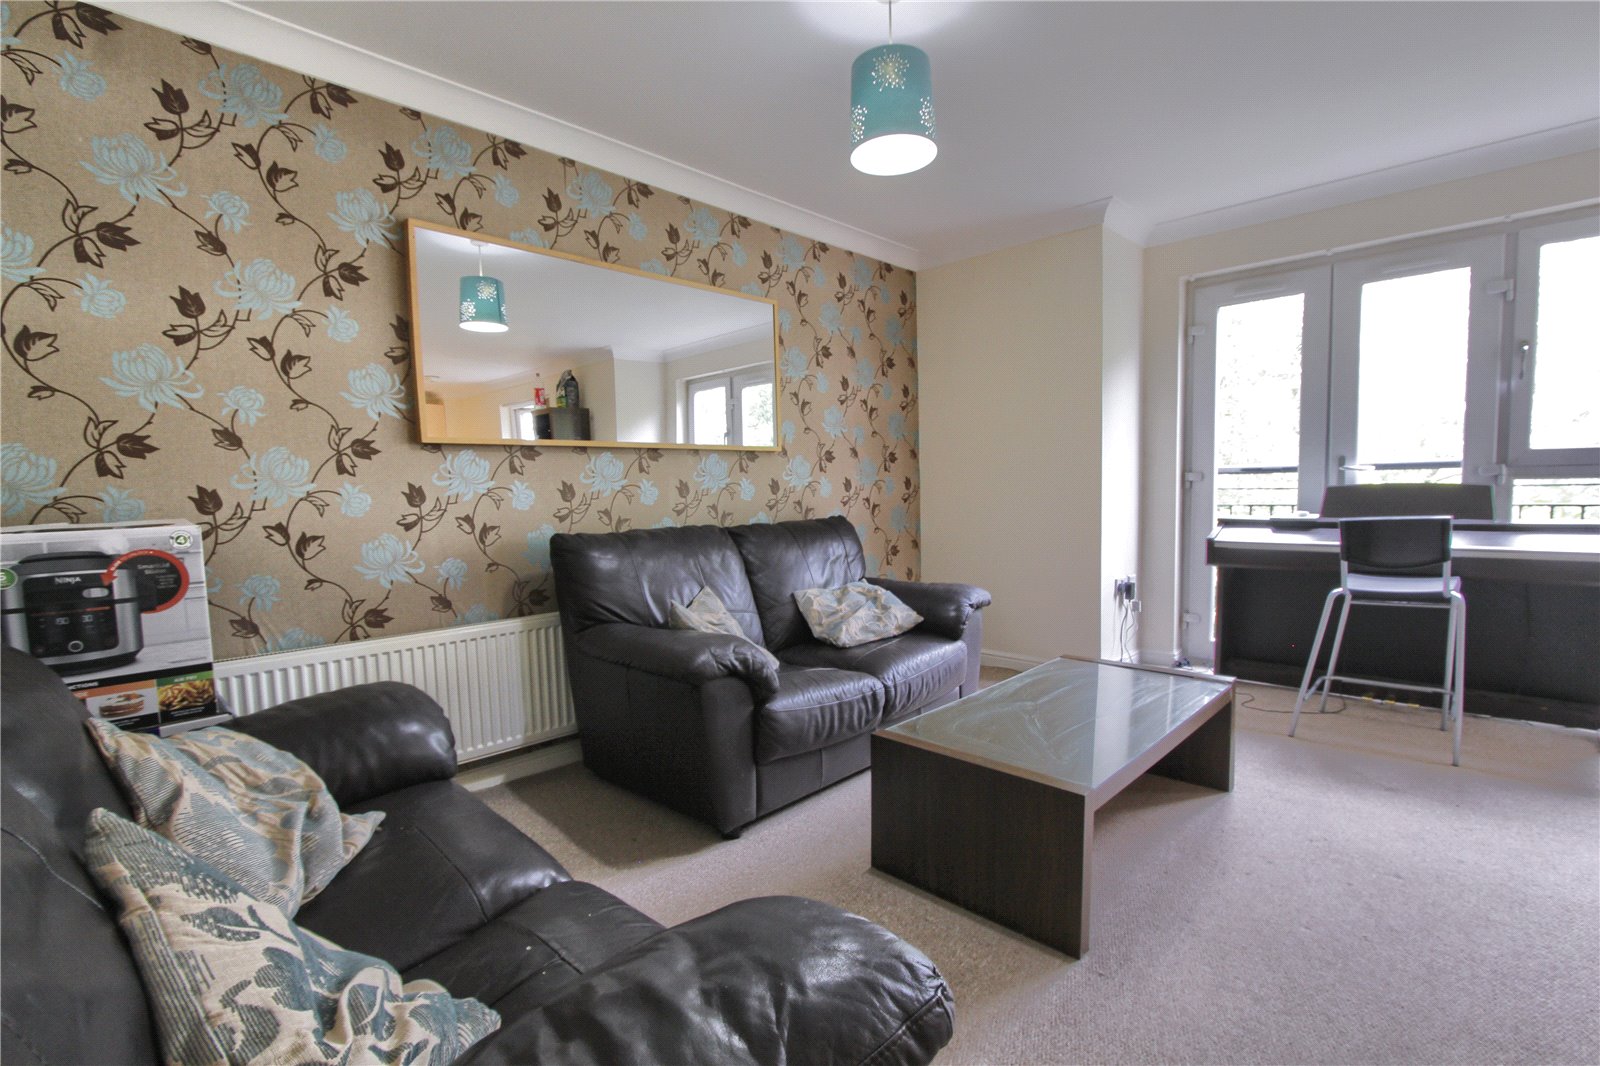 2 bed apartment to rent - Property Image 1